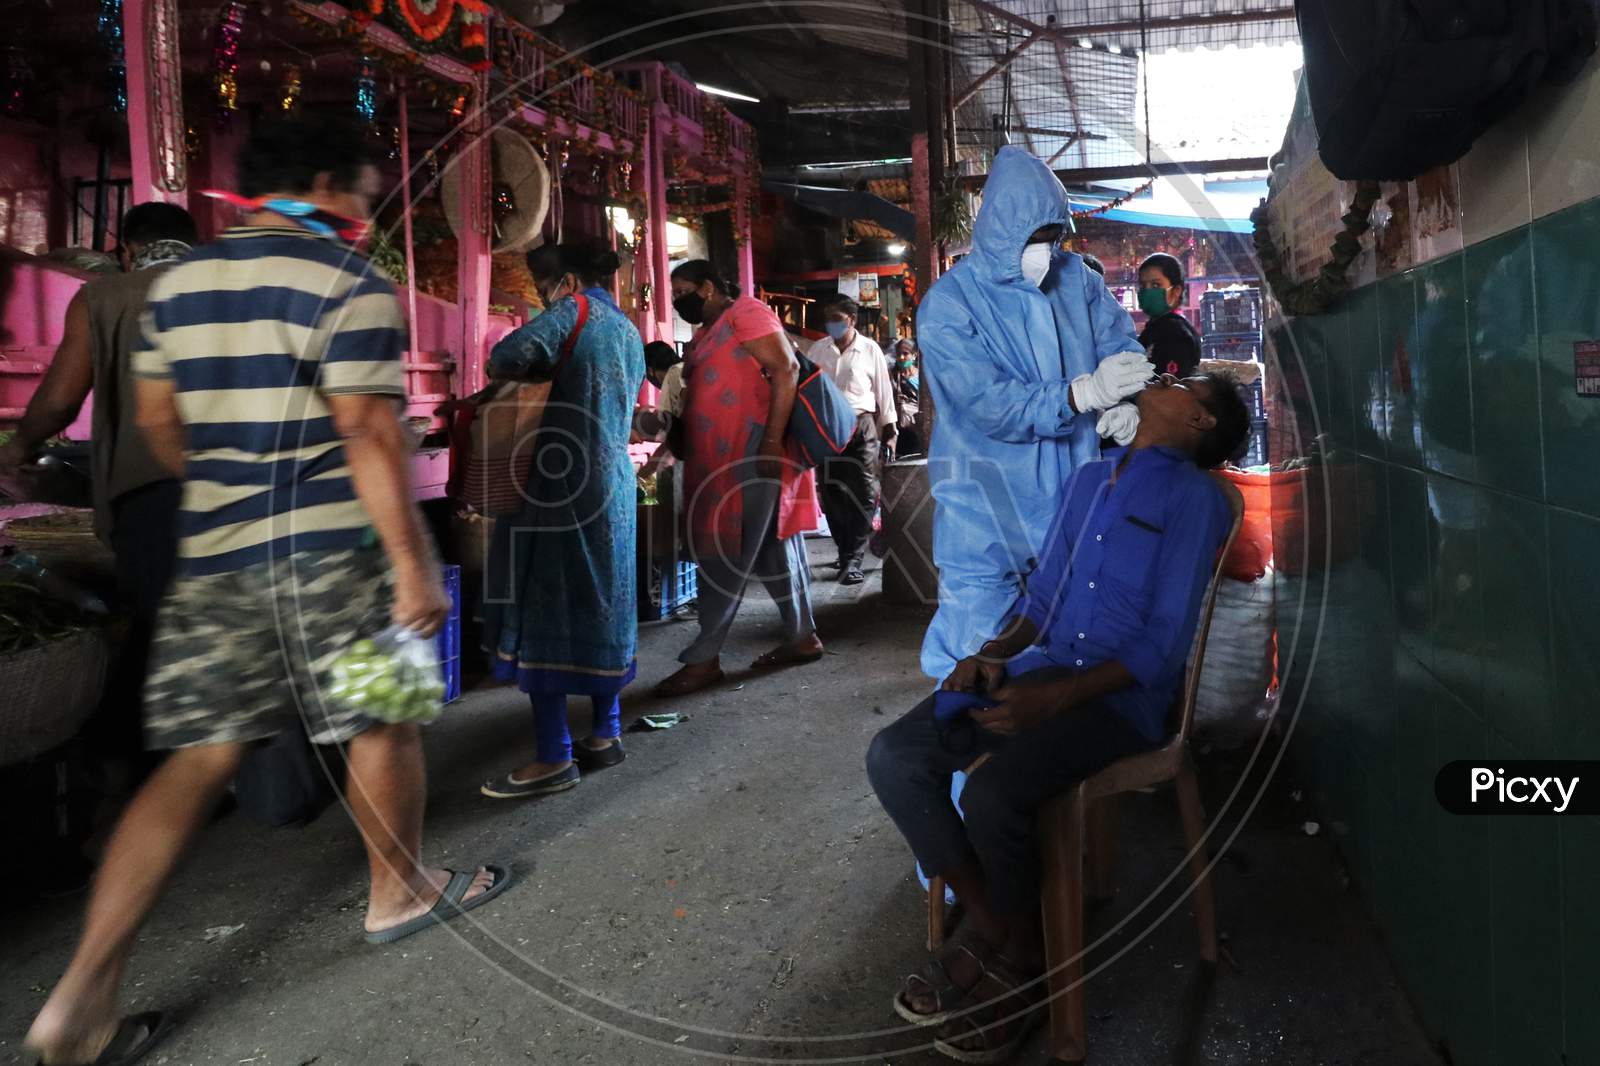 A health worker in personal protective equipment (PPE) collects a swab sample from a man during a rapid antigen testing campaign for the coronavirus disease (COVID-19), at a vegetable market in Mumbai, India, November 21, 2020.